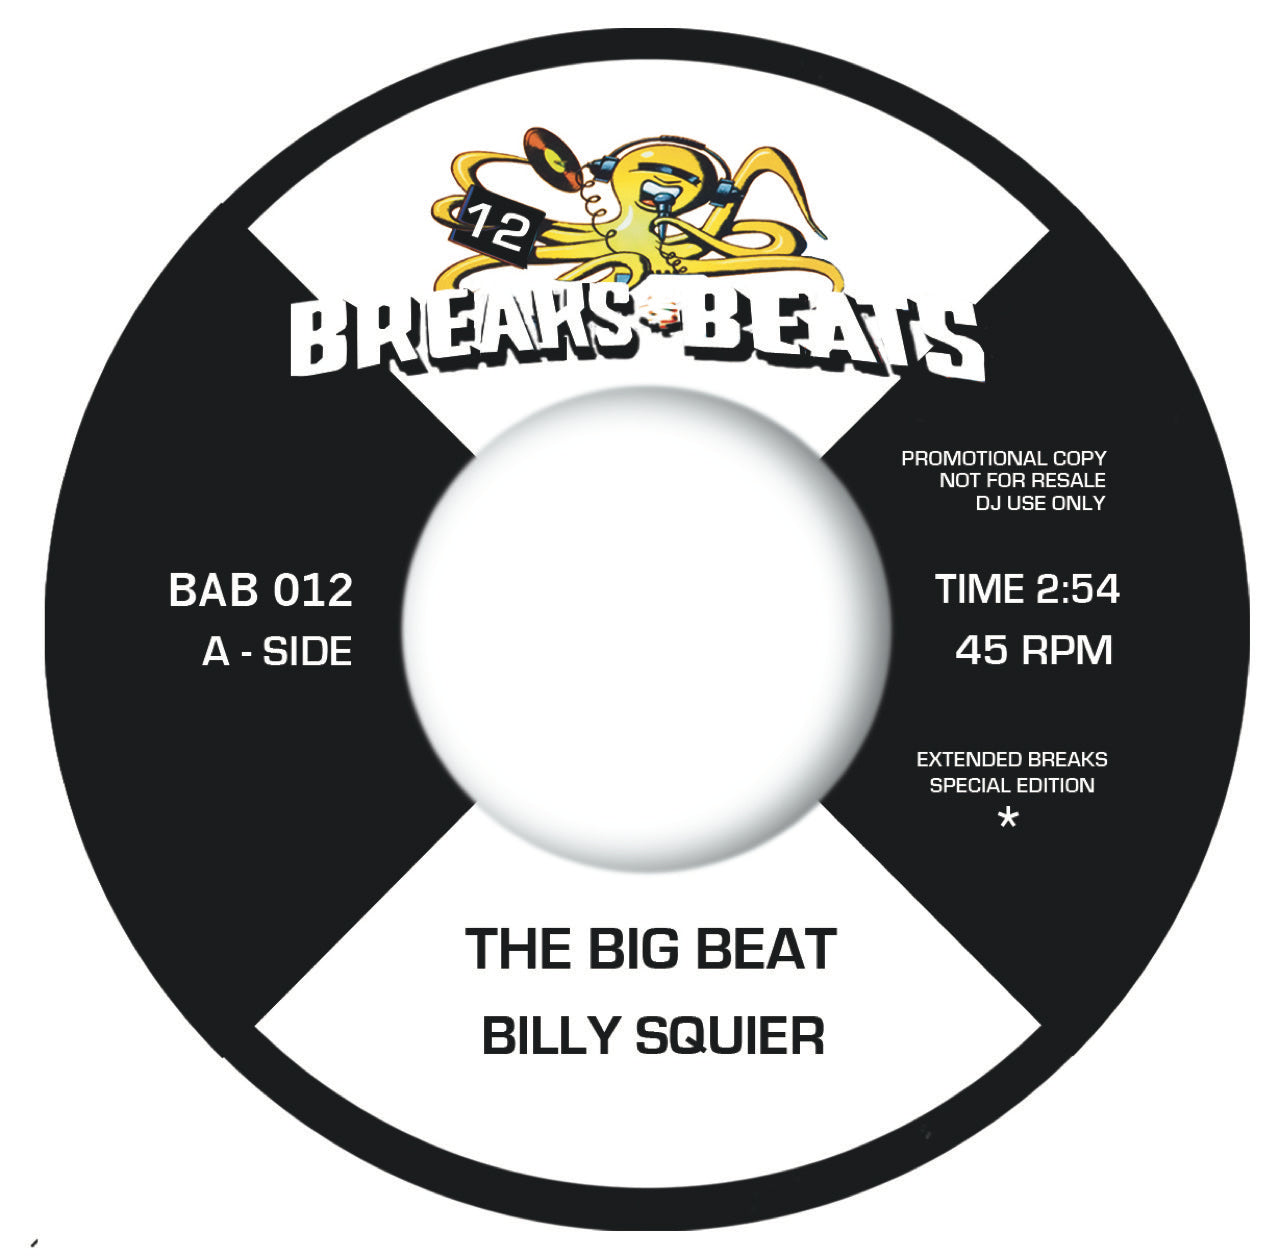 Billy Squier - The Big Beat b/w Le Pamplemousse - Gimmie What You Got